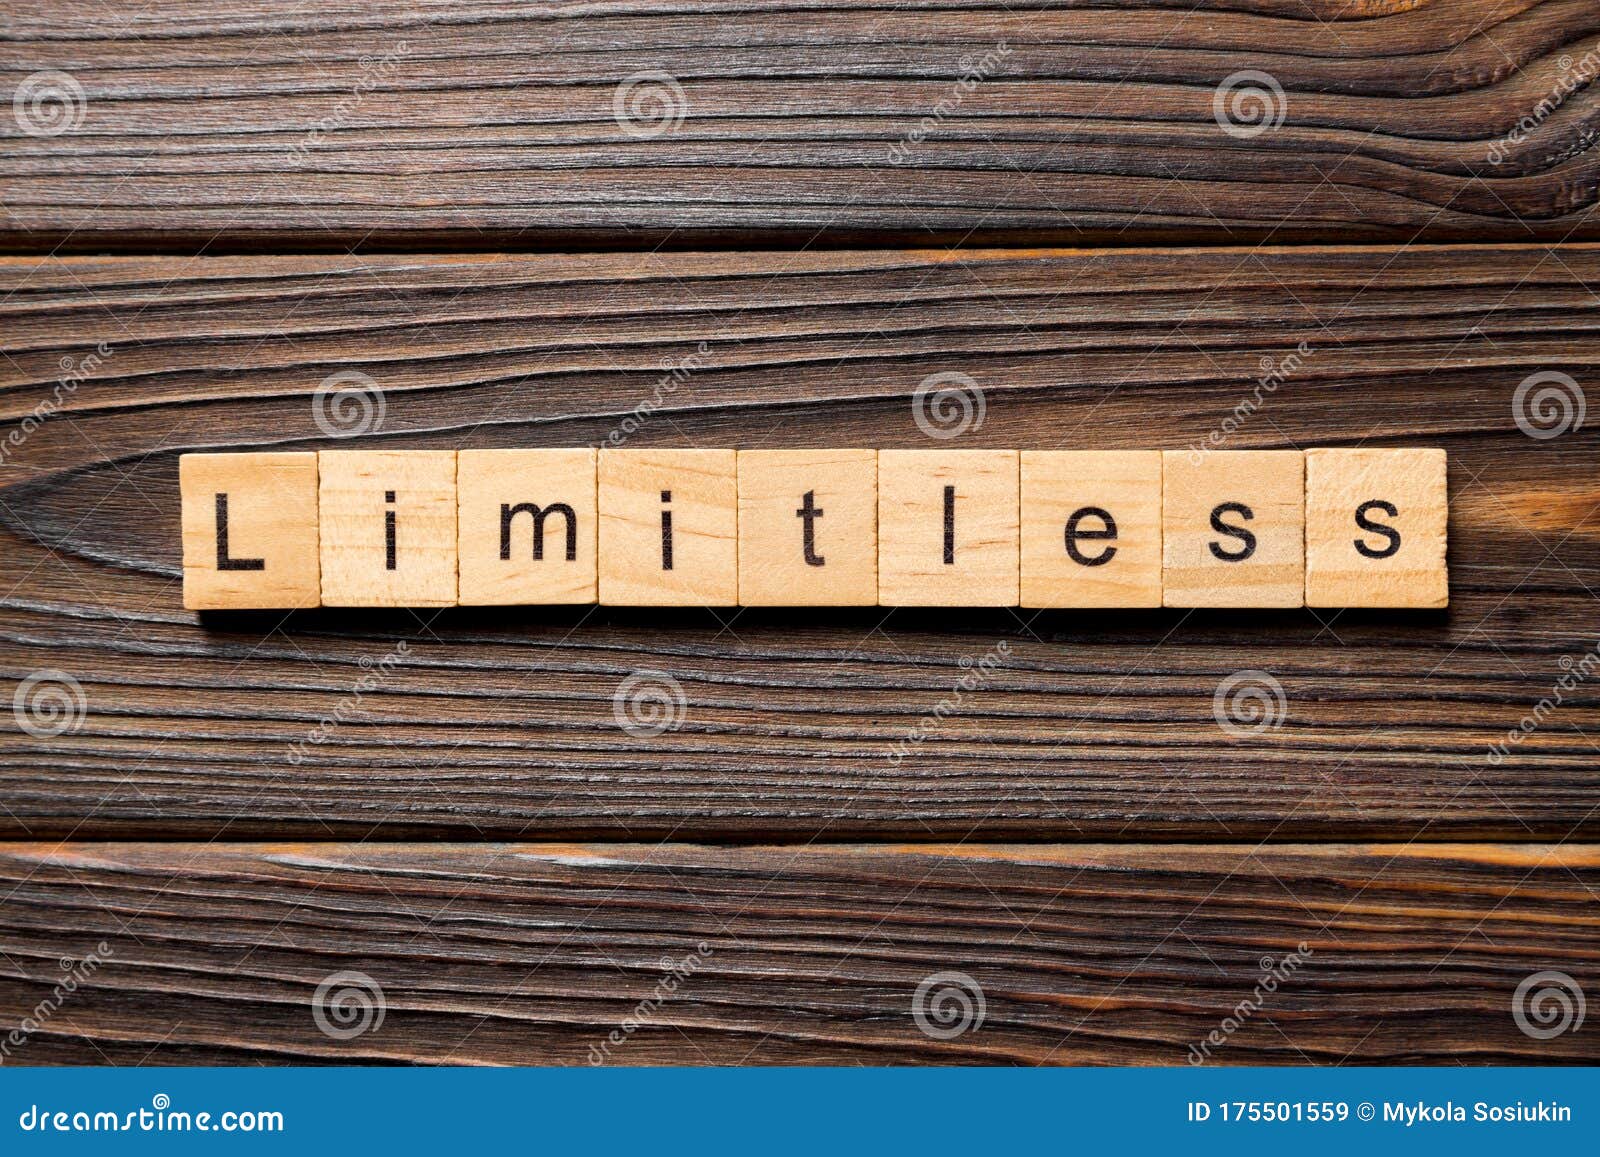 145 Time Limitless Stock Photos - Free & Royalty-Free Stock Photos from